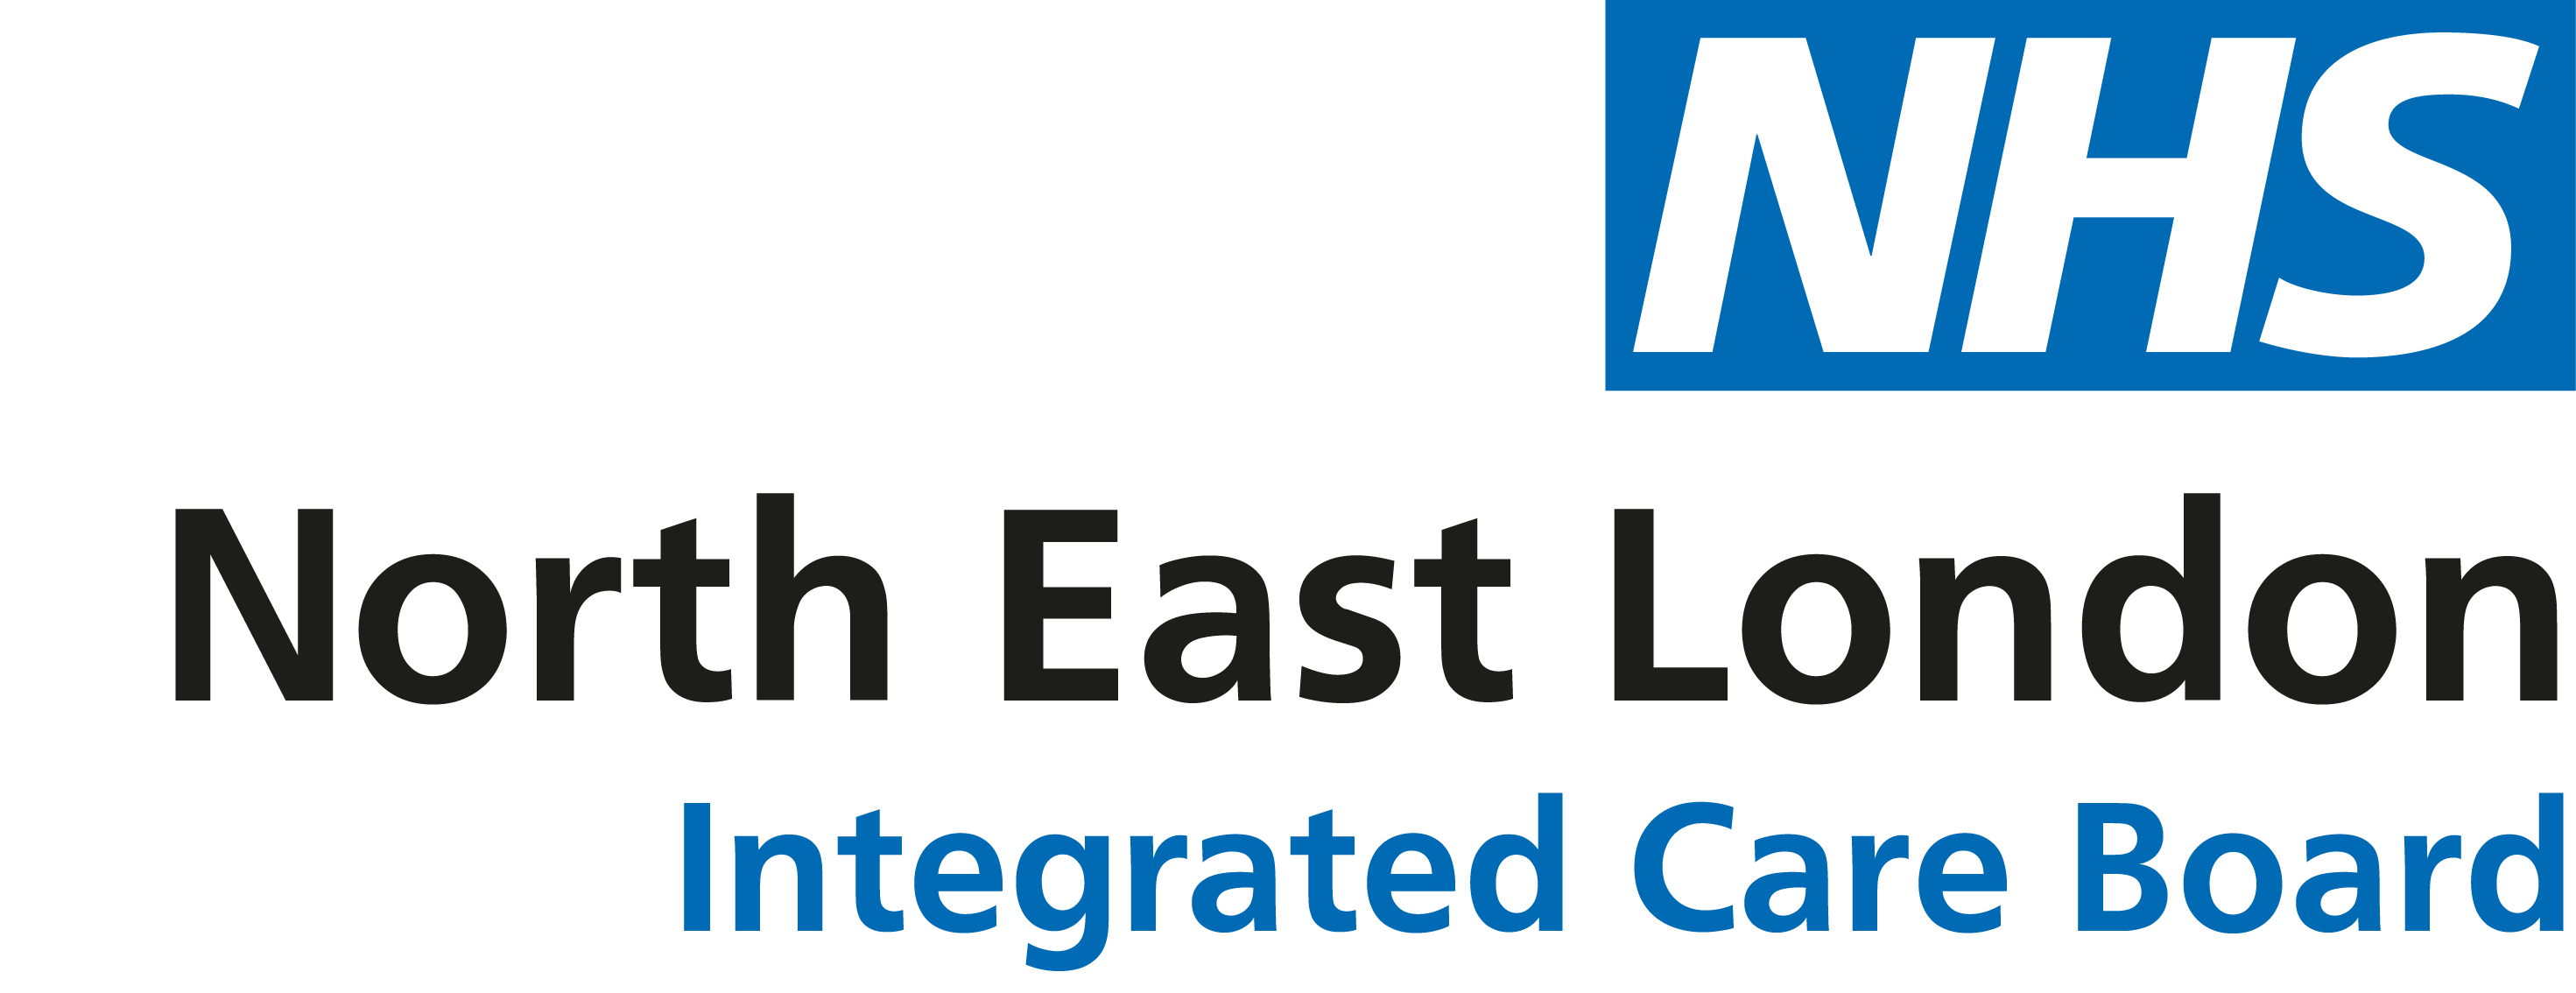 North East London Integrated Care Board logo